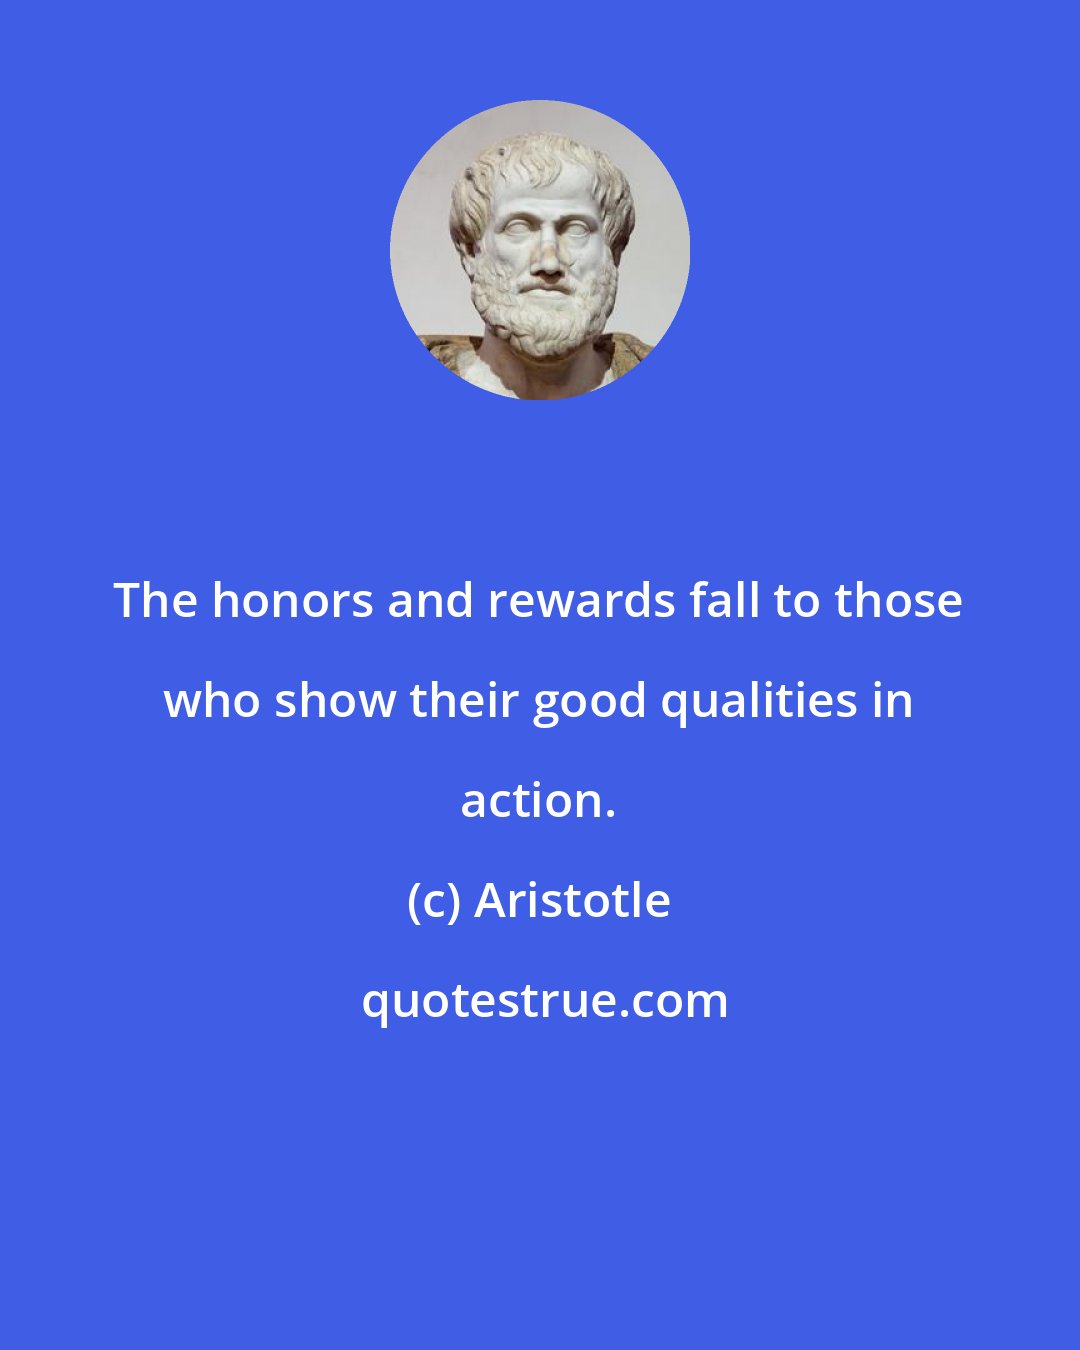 Aristotle: The honors and rewards fall to those who show their good qualities in action.